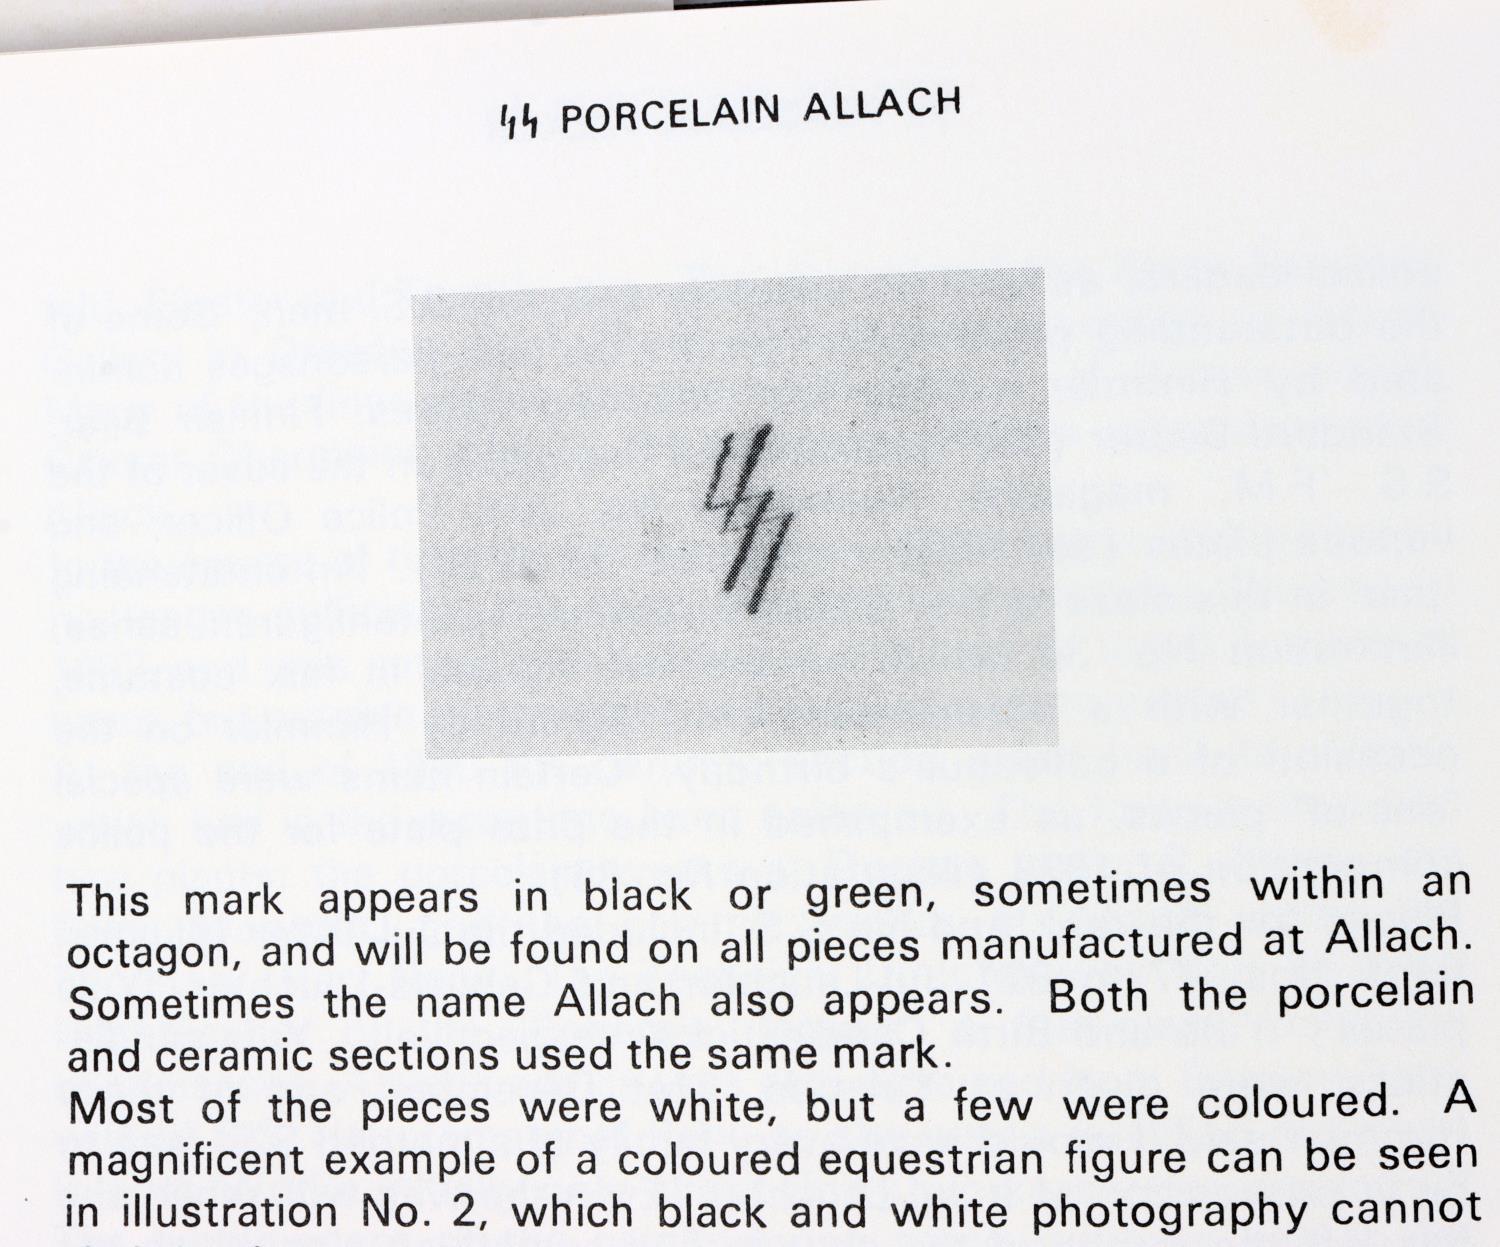 SS PORCELAIN ALLACH TONY OLIVER 1972 BOOK